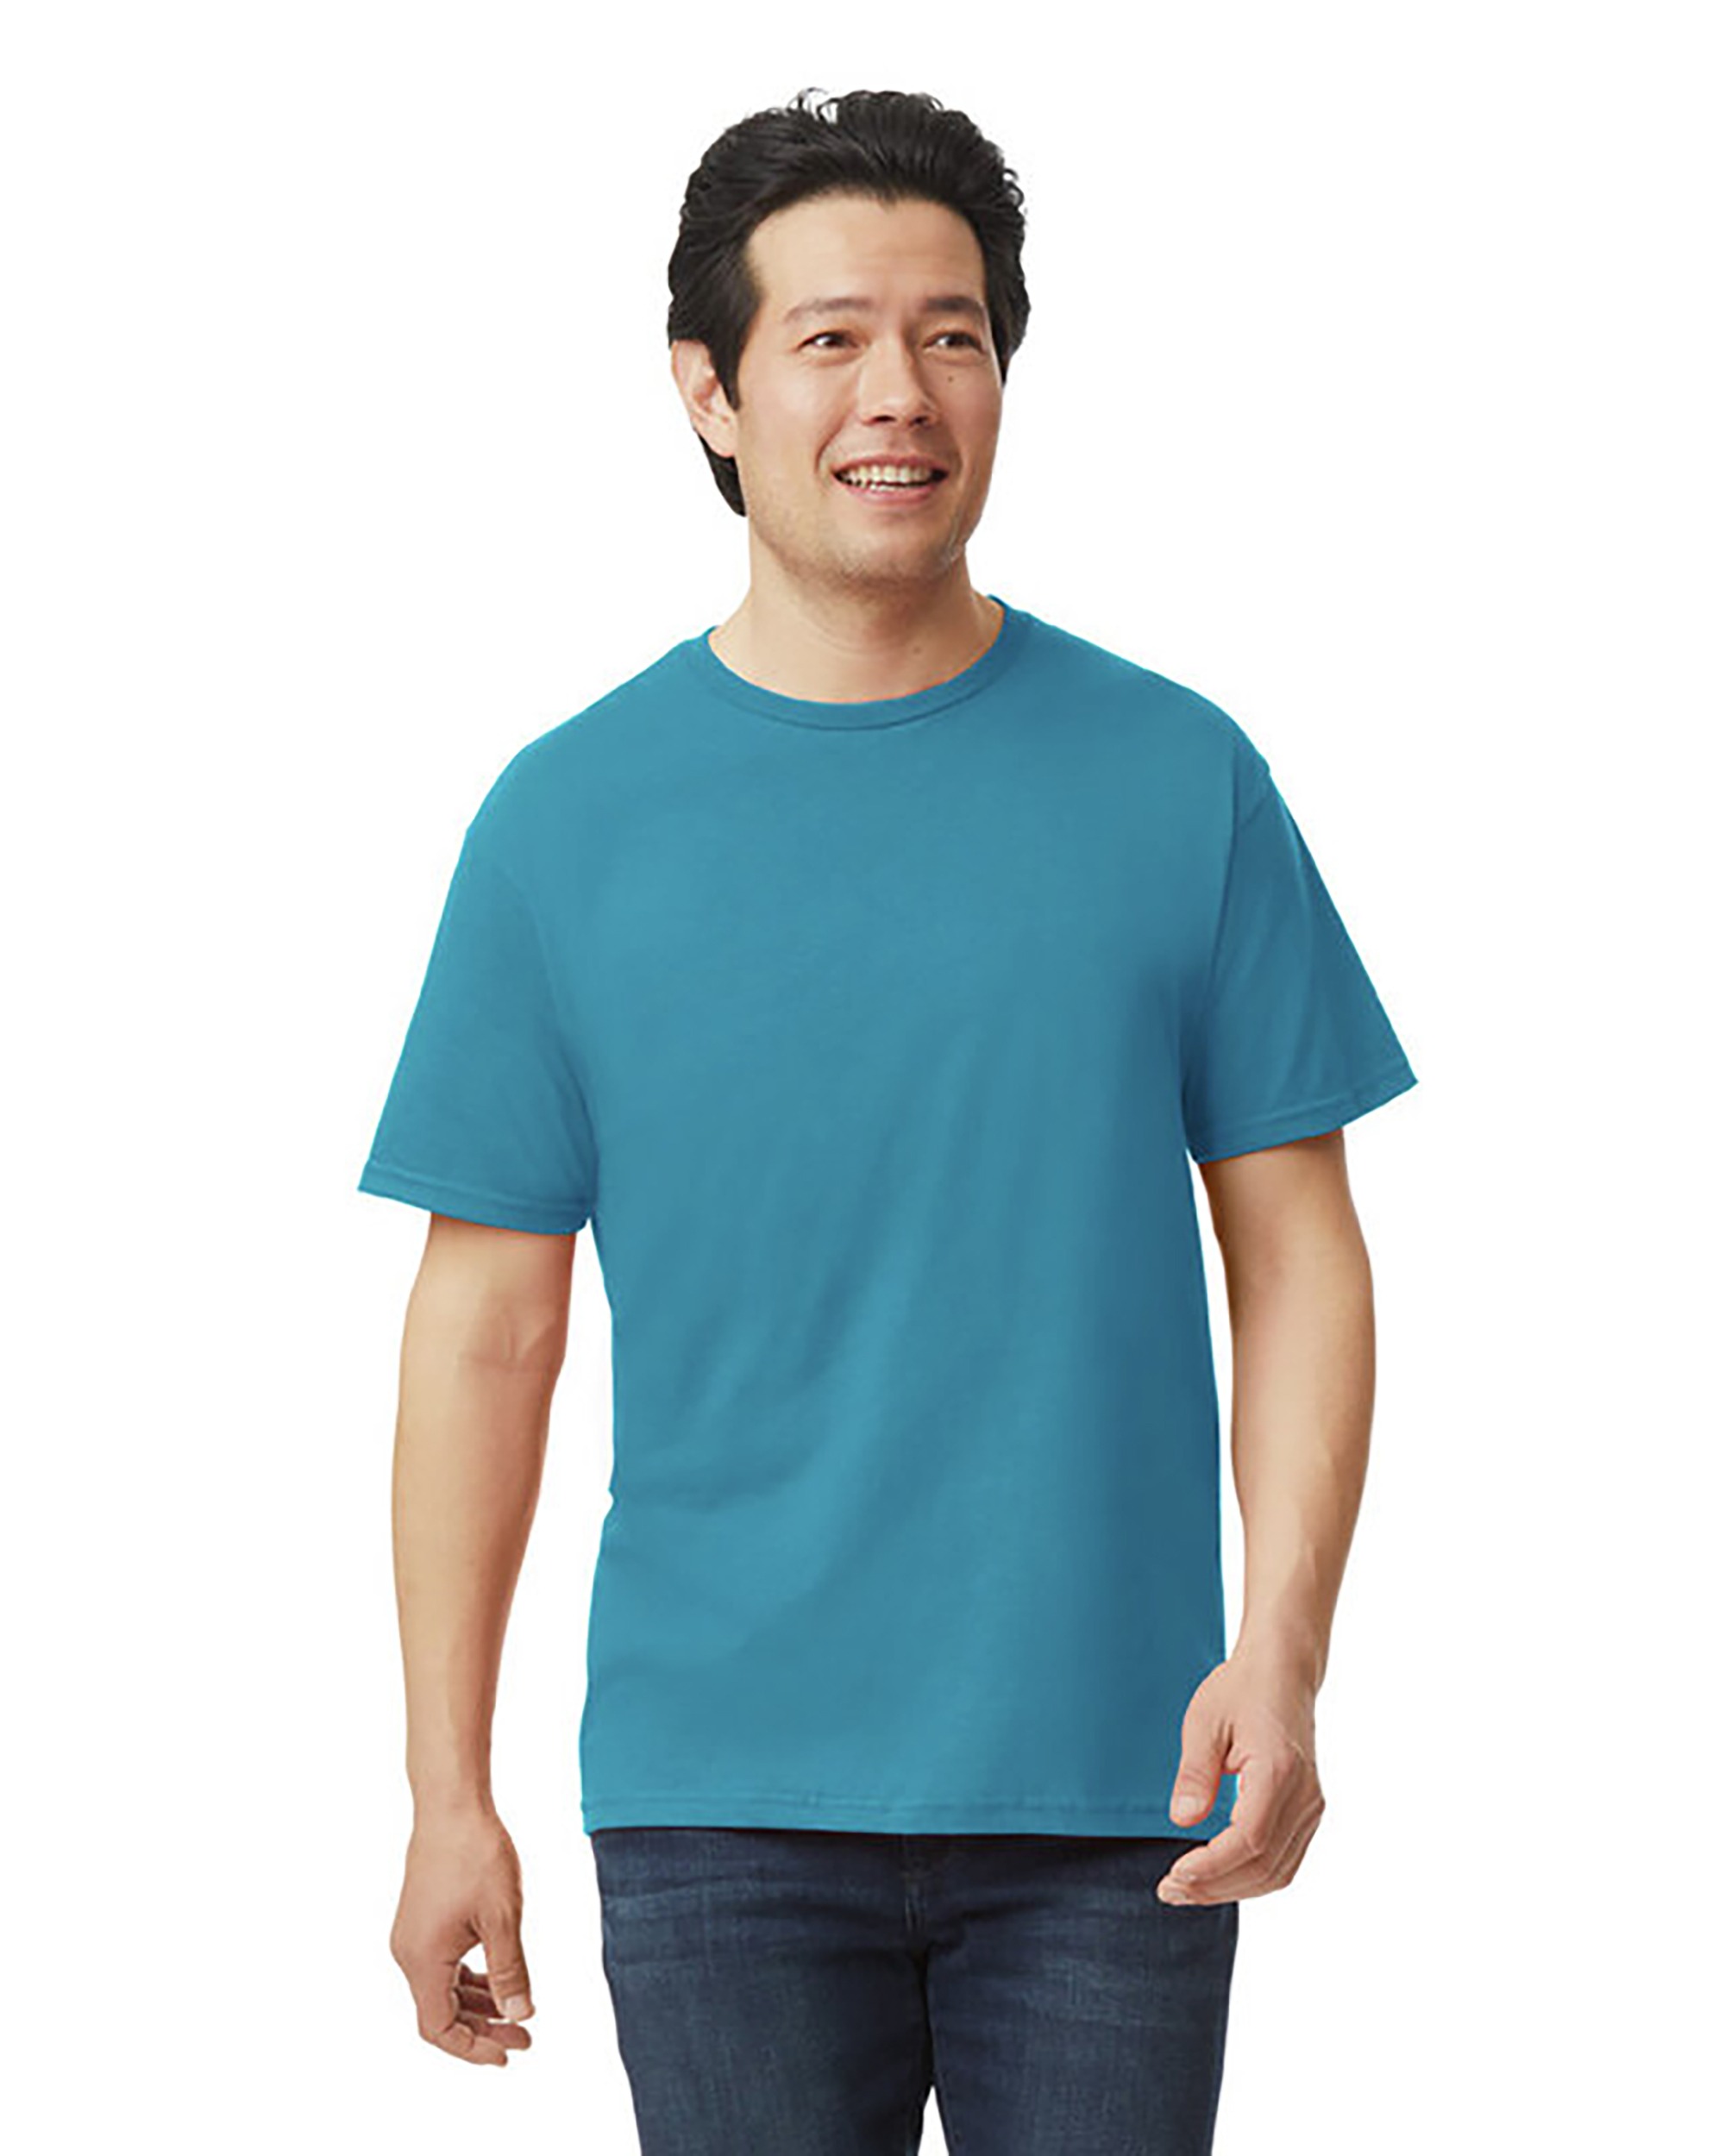 Gildan® 64000 Softstyle® Adult T-Shirt, shown in Antique Sapphire